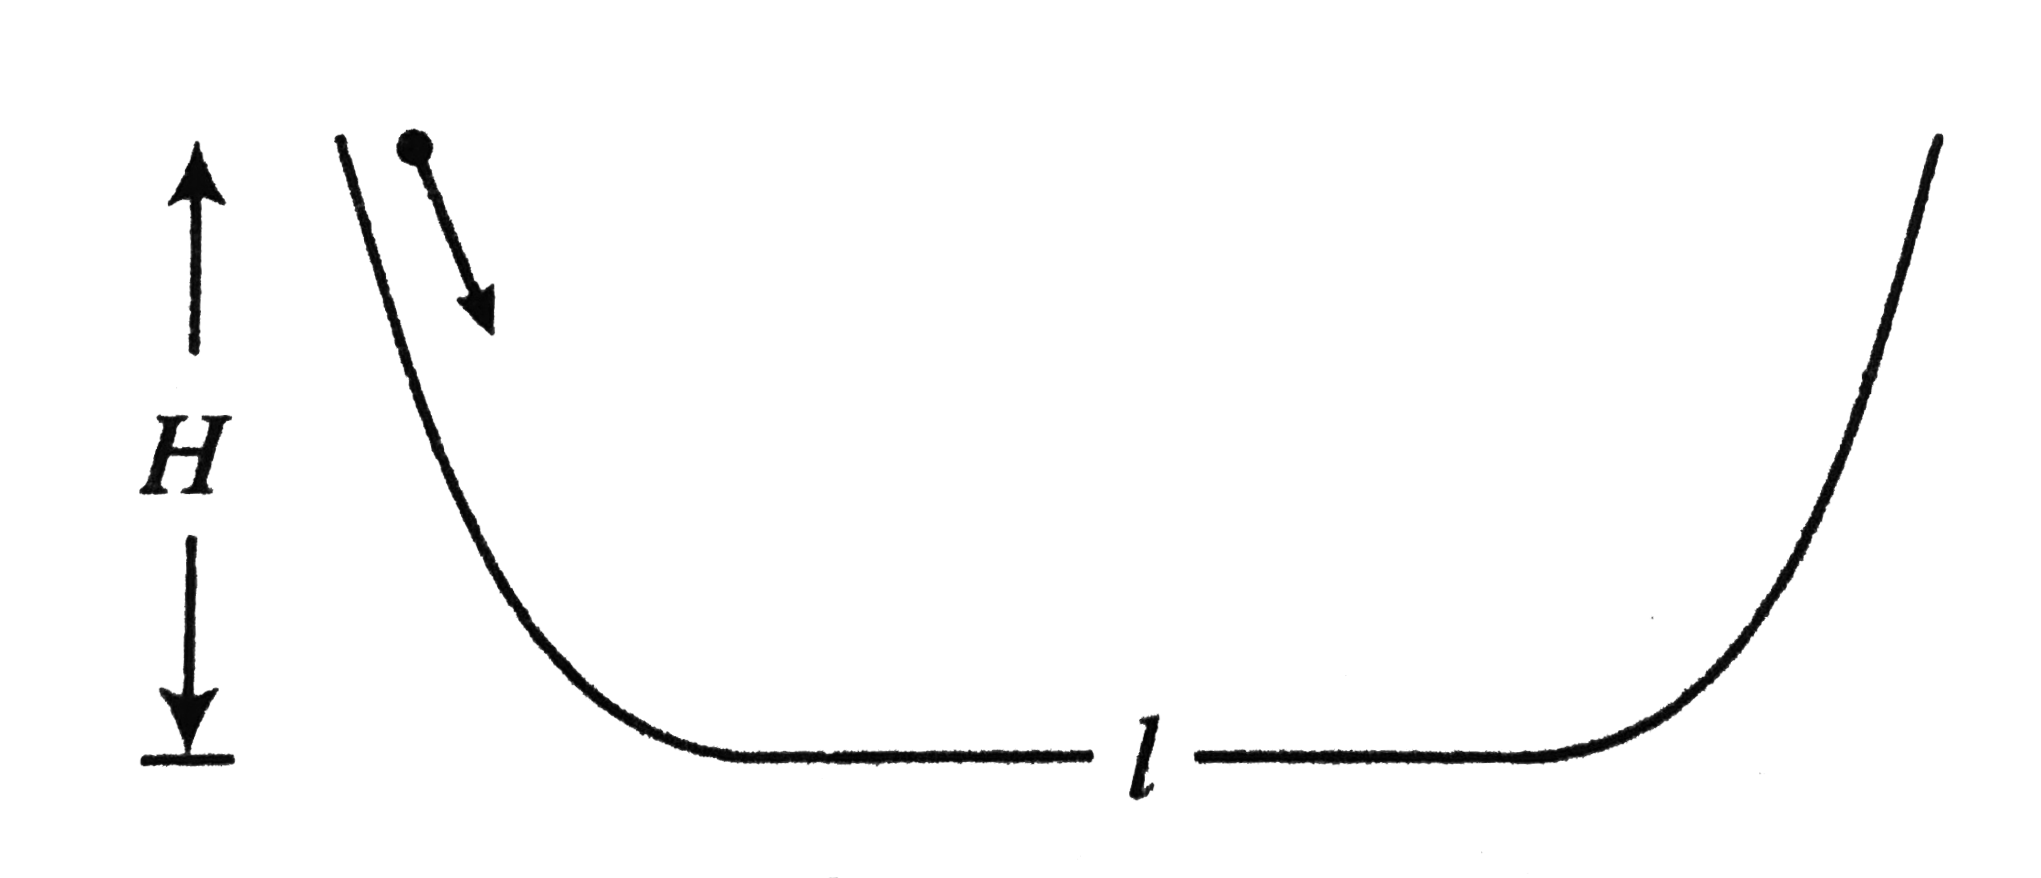 A particle of mass m slides along a curved-flat-curved track. The curved portions of the track are smooth. If the particle is released at the top of one of the curved portions, the particle comes to rest at flat portion of length l and of mu=mu(ki n etic) after covering a distance of